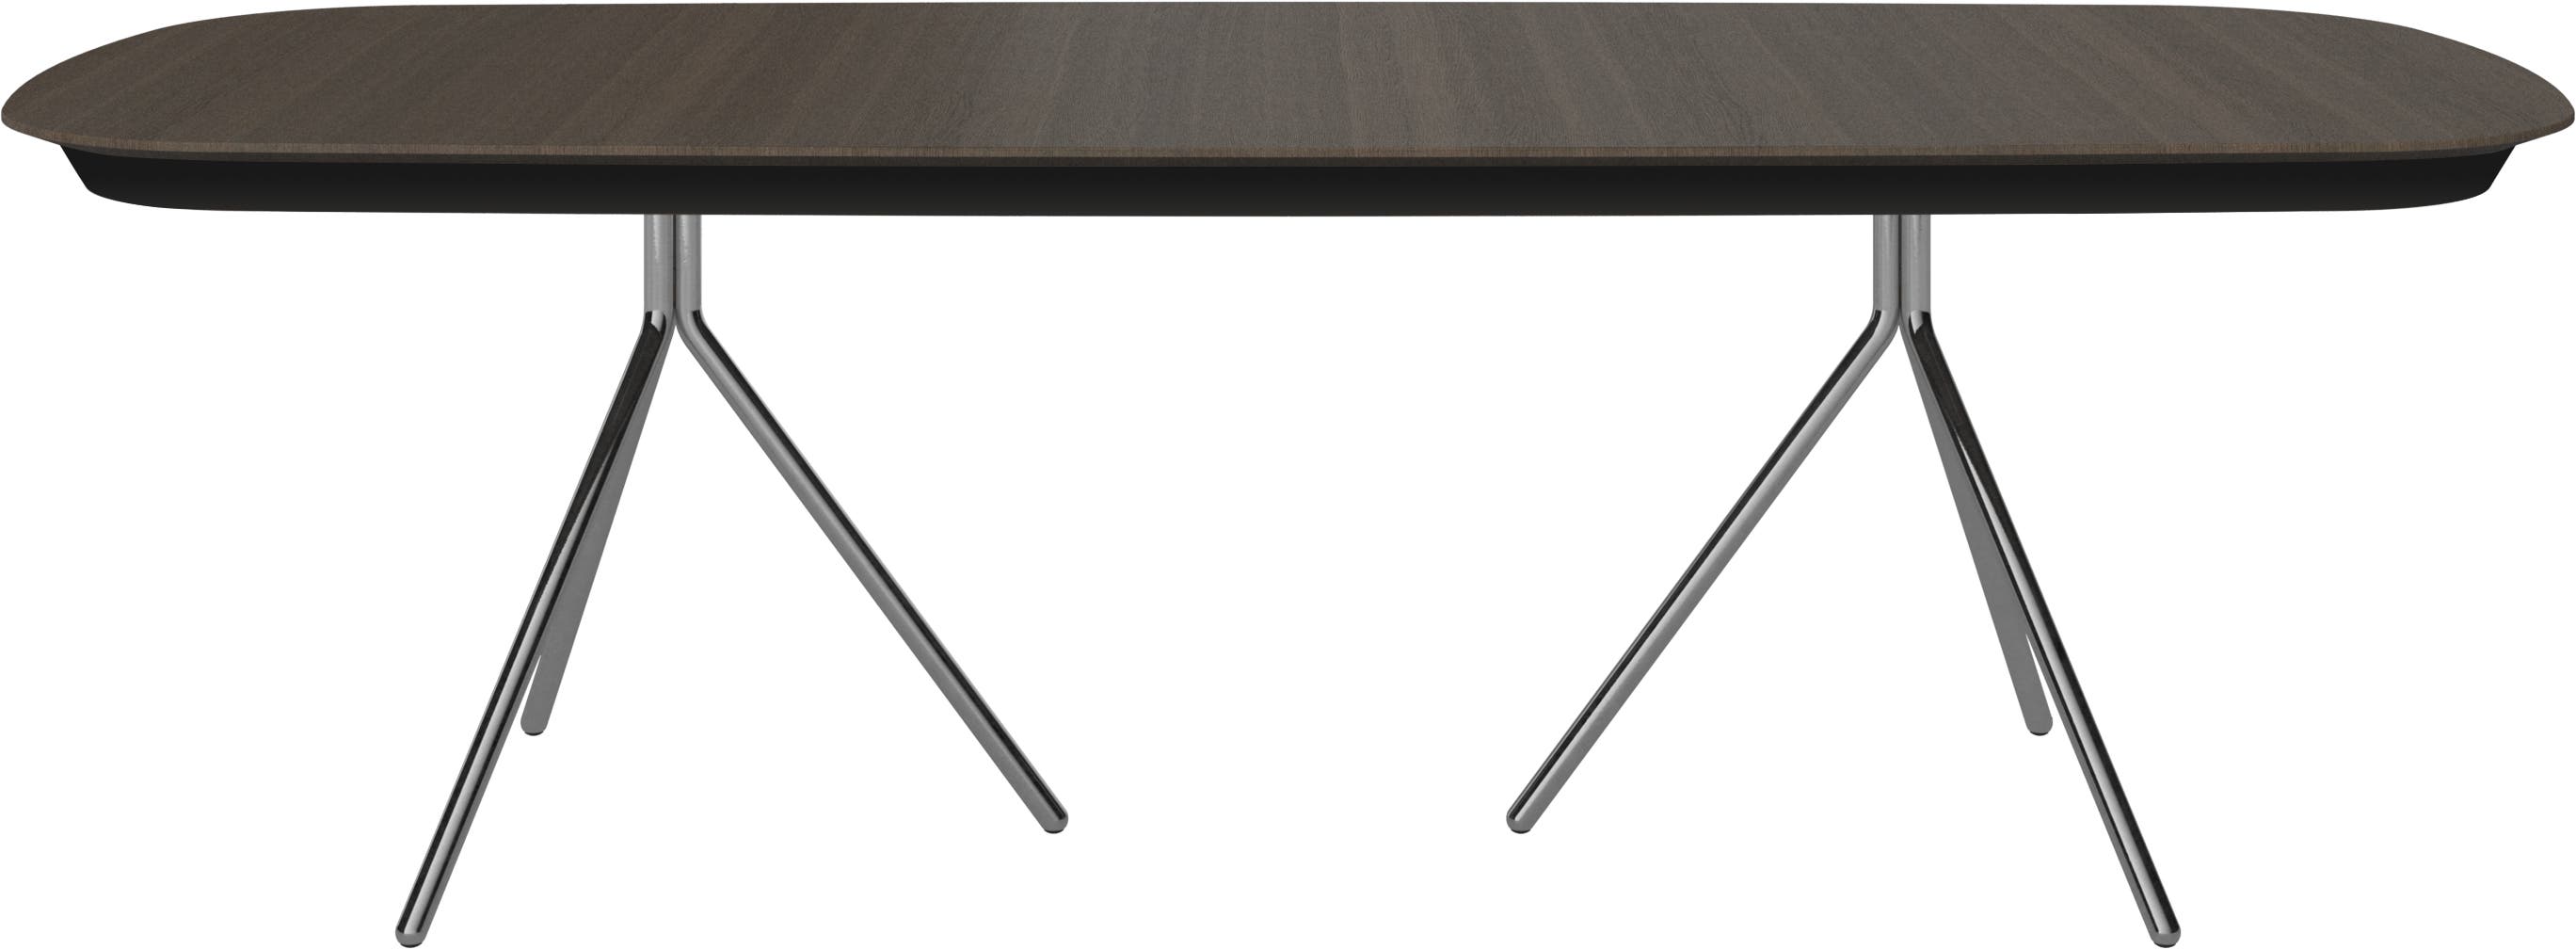 Ottawa extendable dining table